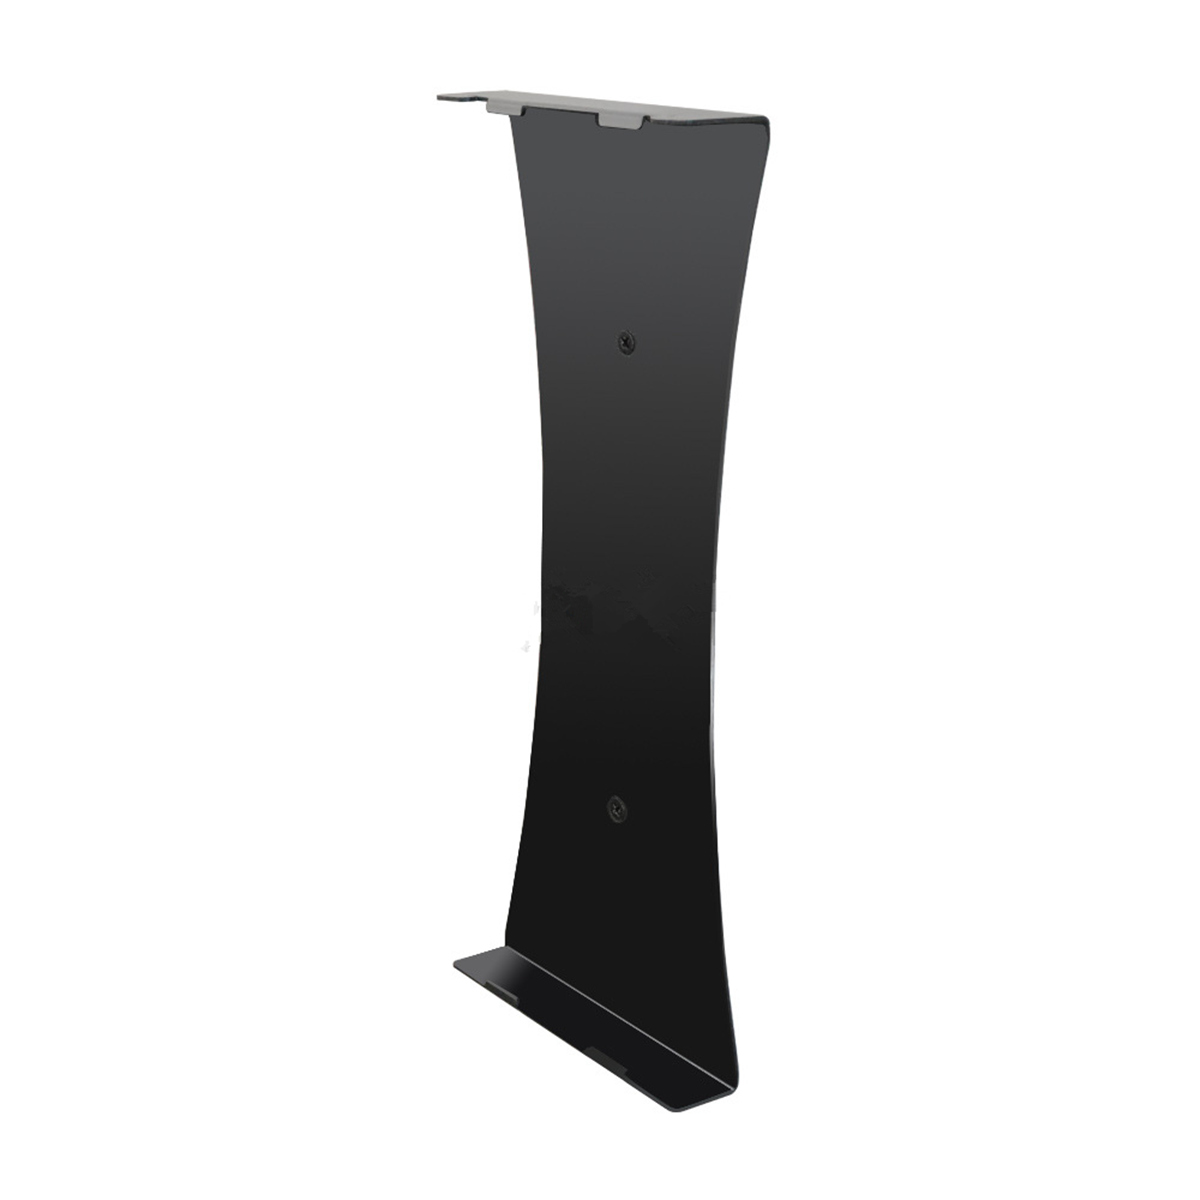 Ultra Slim Vertical Wall Mount Stand Holder Bracket For XBOX ONE X Game Console 39